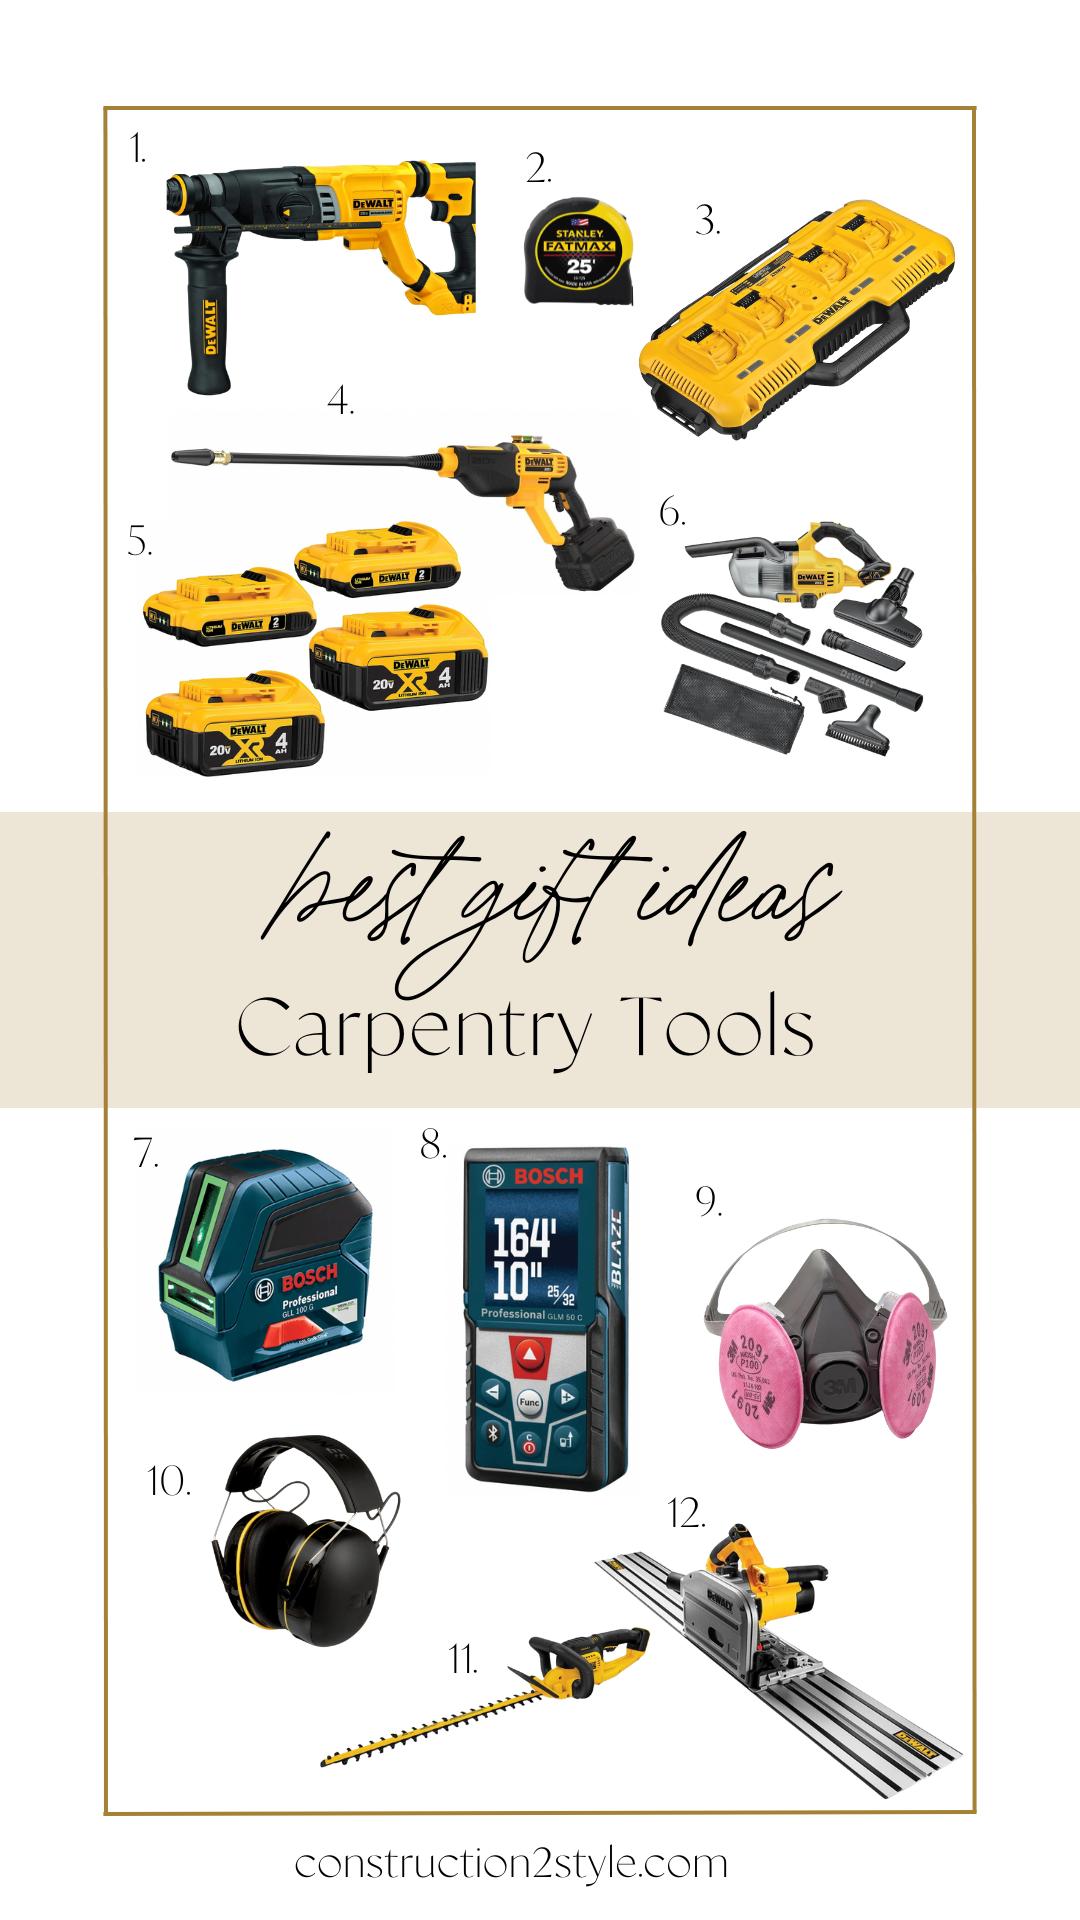 best gift ideas carpentry tools